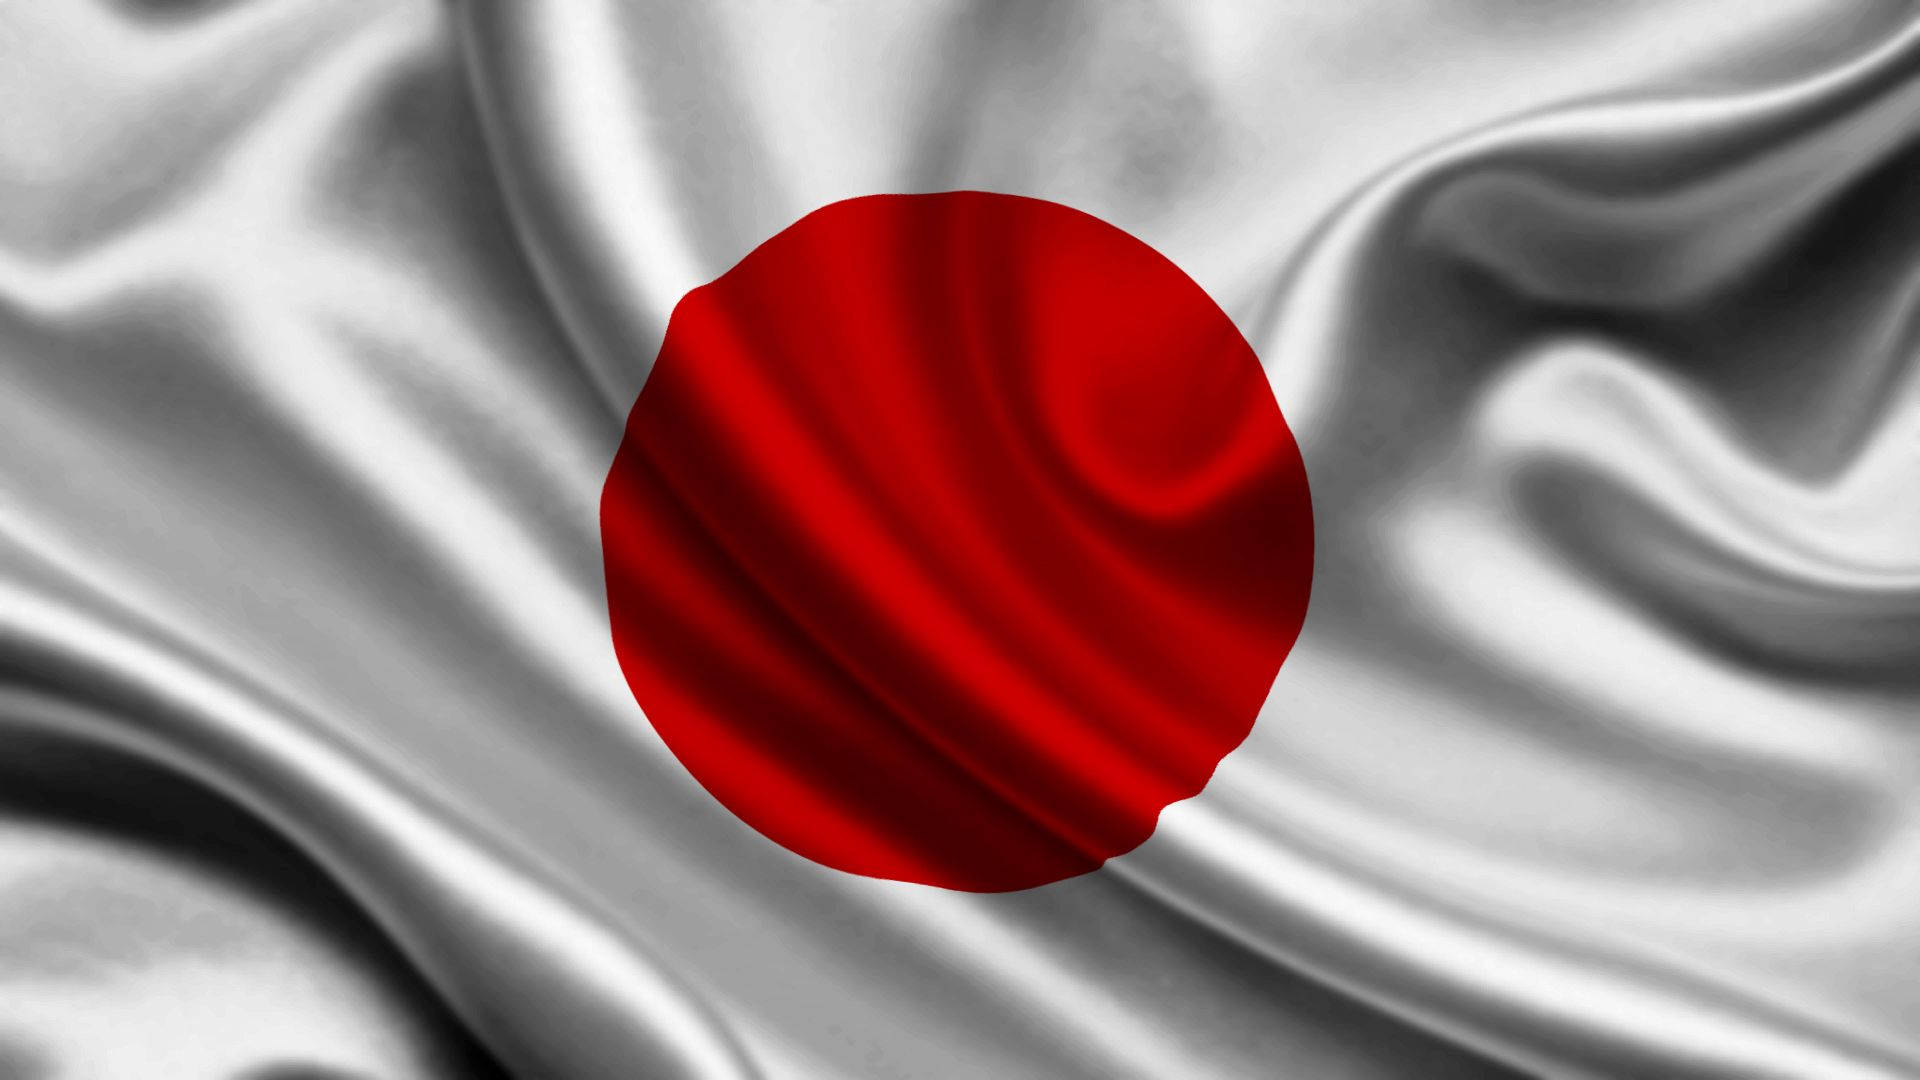 Gray Cloth Of A Japan Flag Background